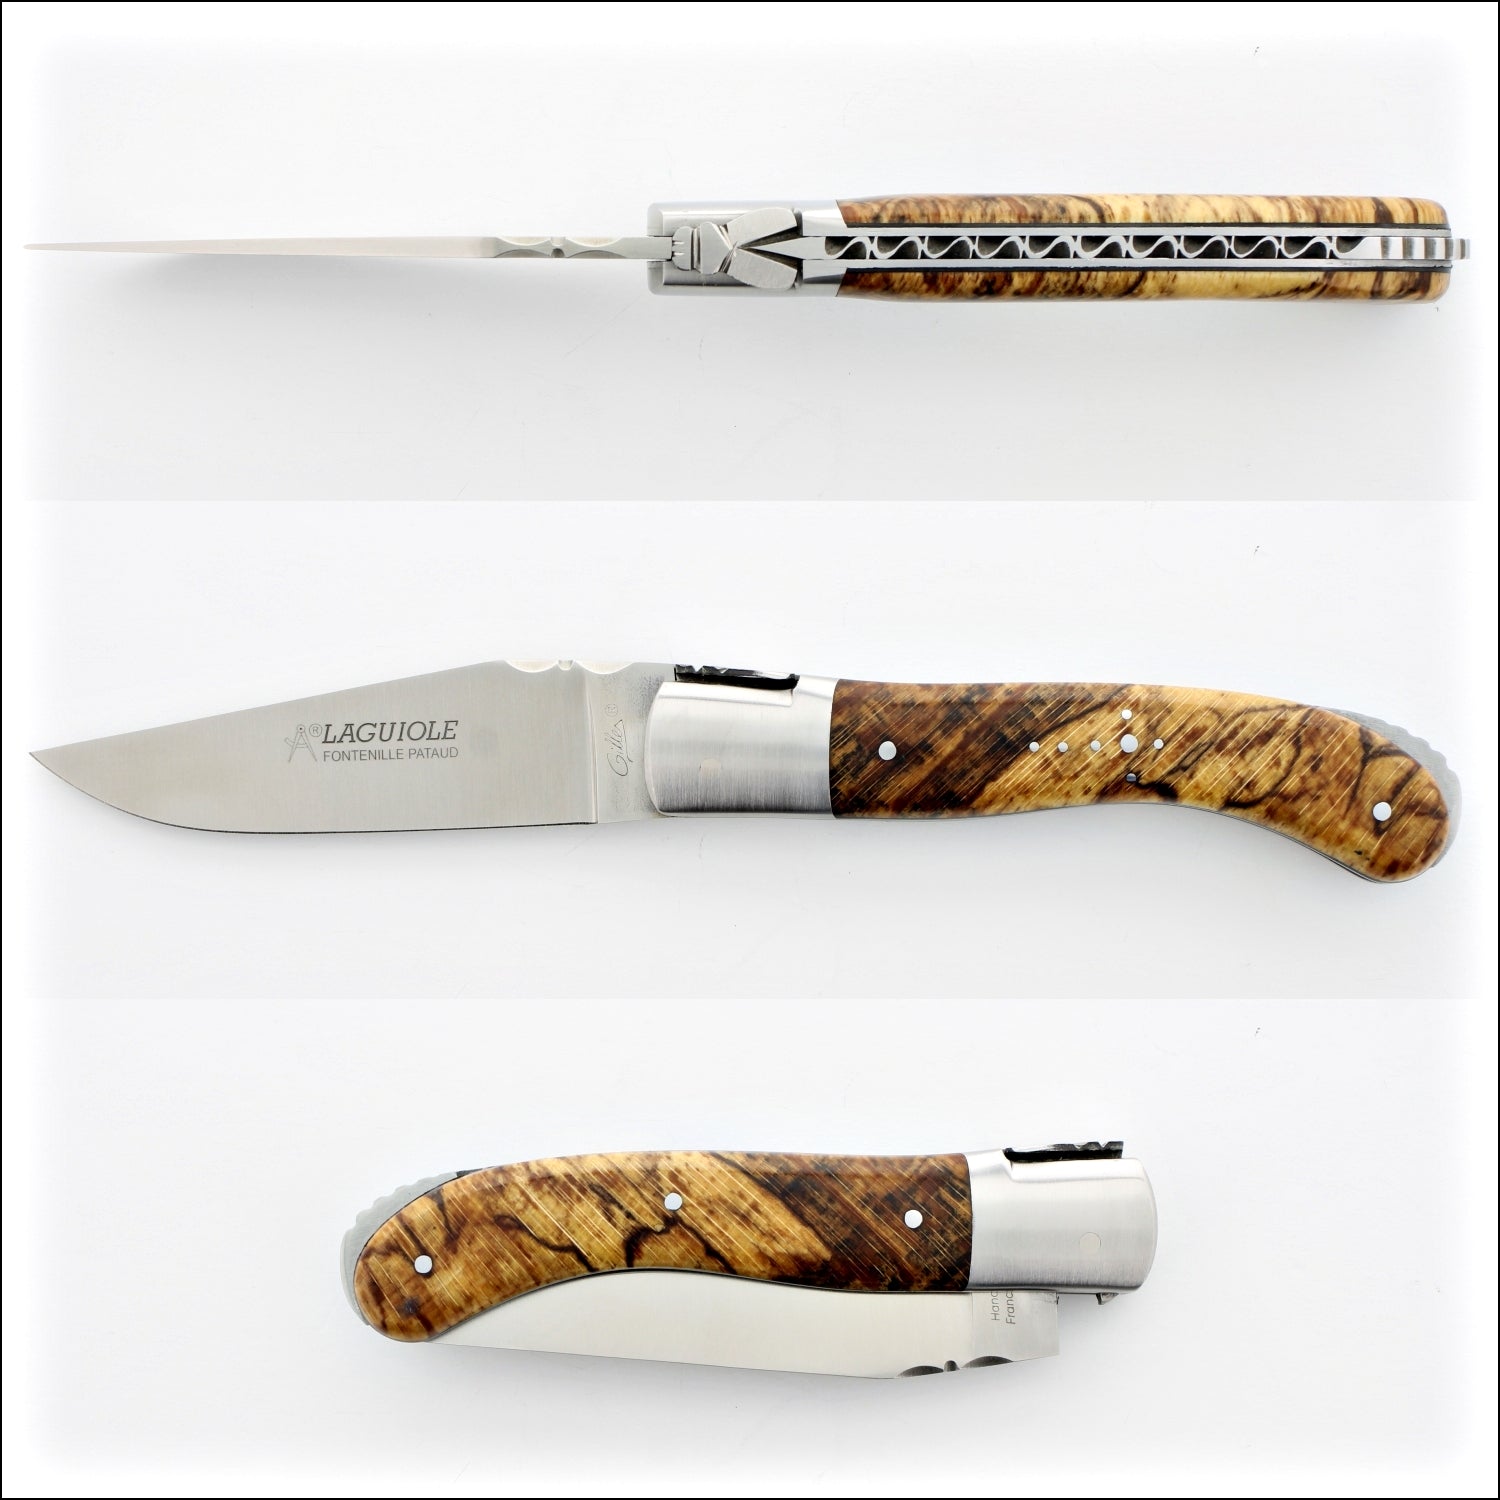 Classic Hunting Knife With Wood Handle